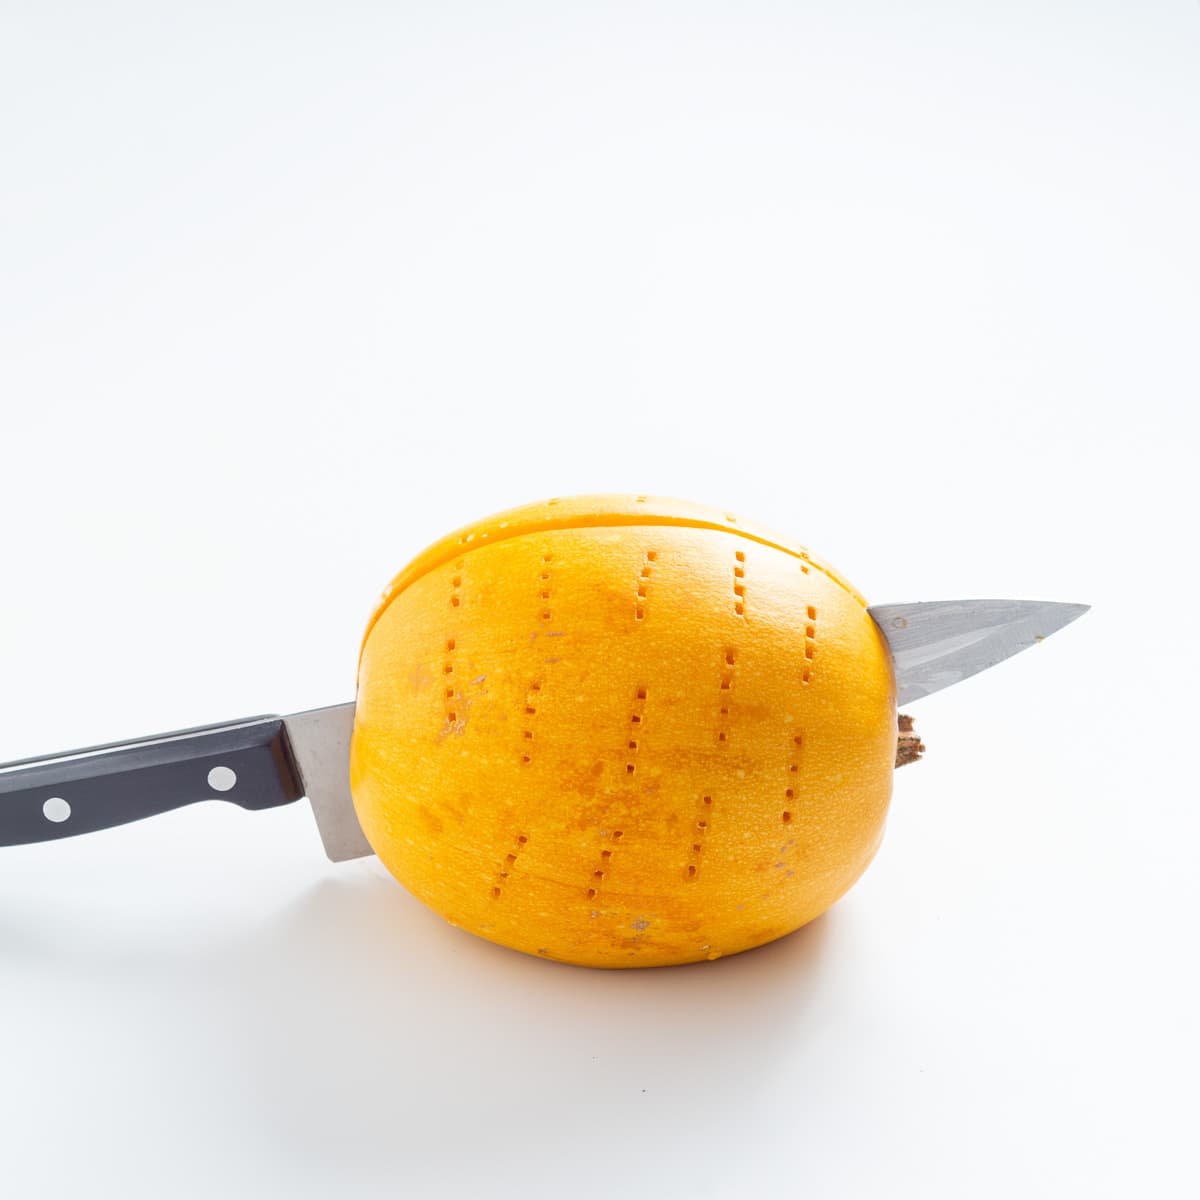 A straight view of a knife slicing into the spaghetti squash.